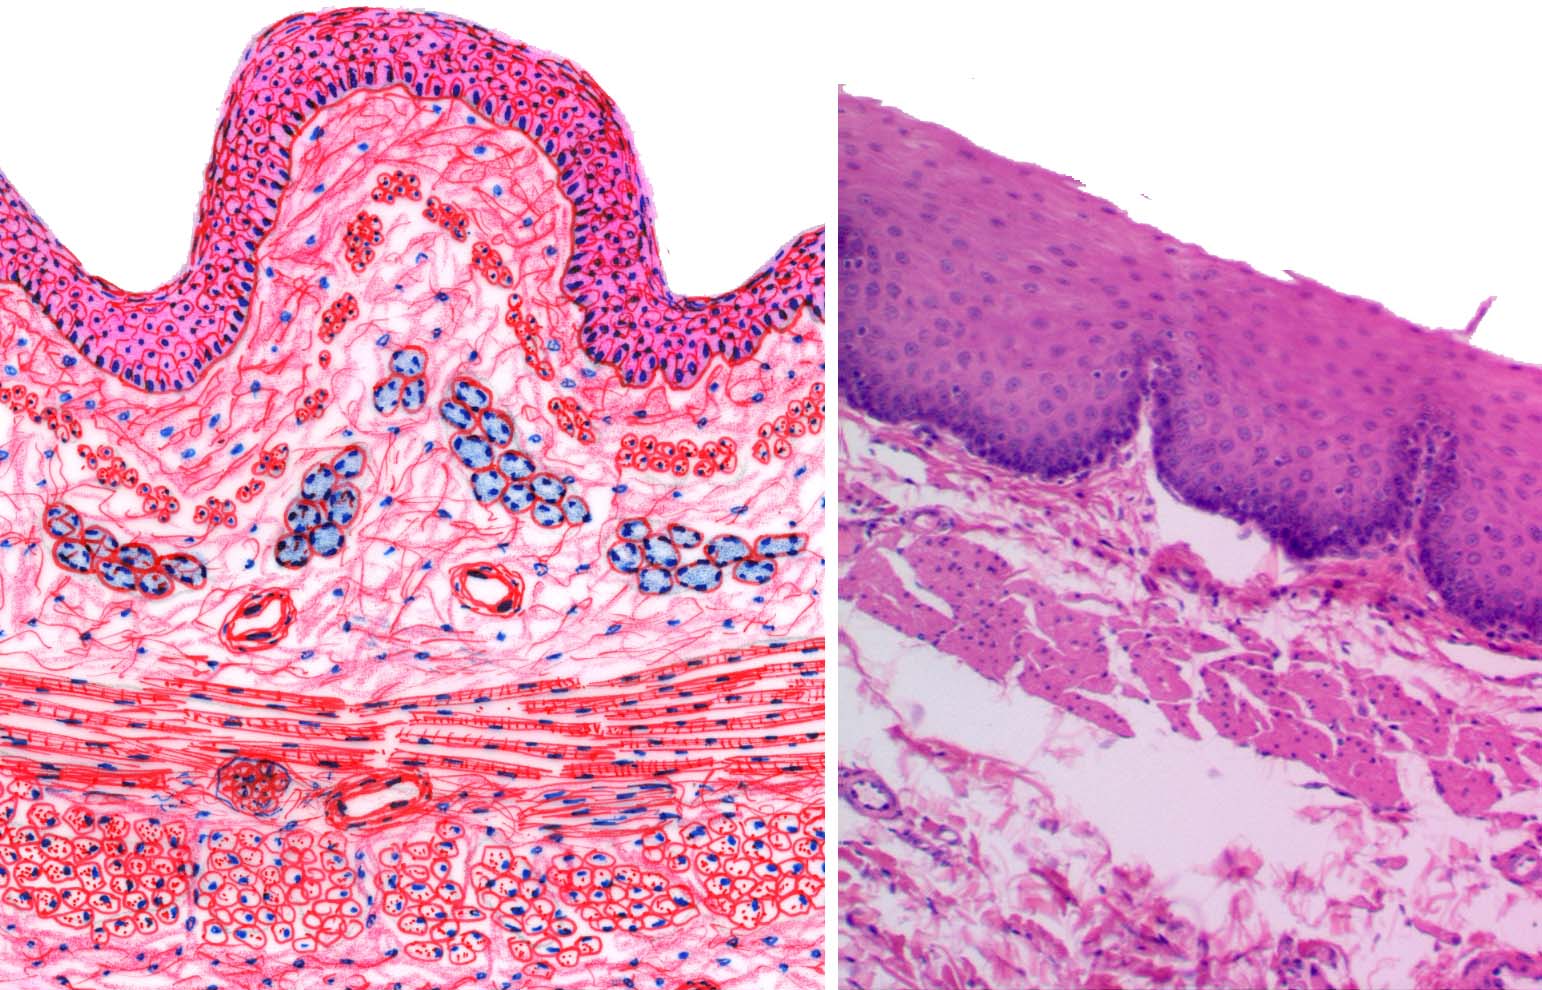 histology of esophagus and stomach